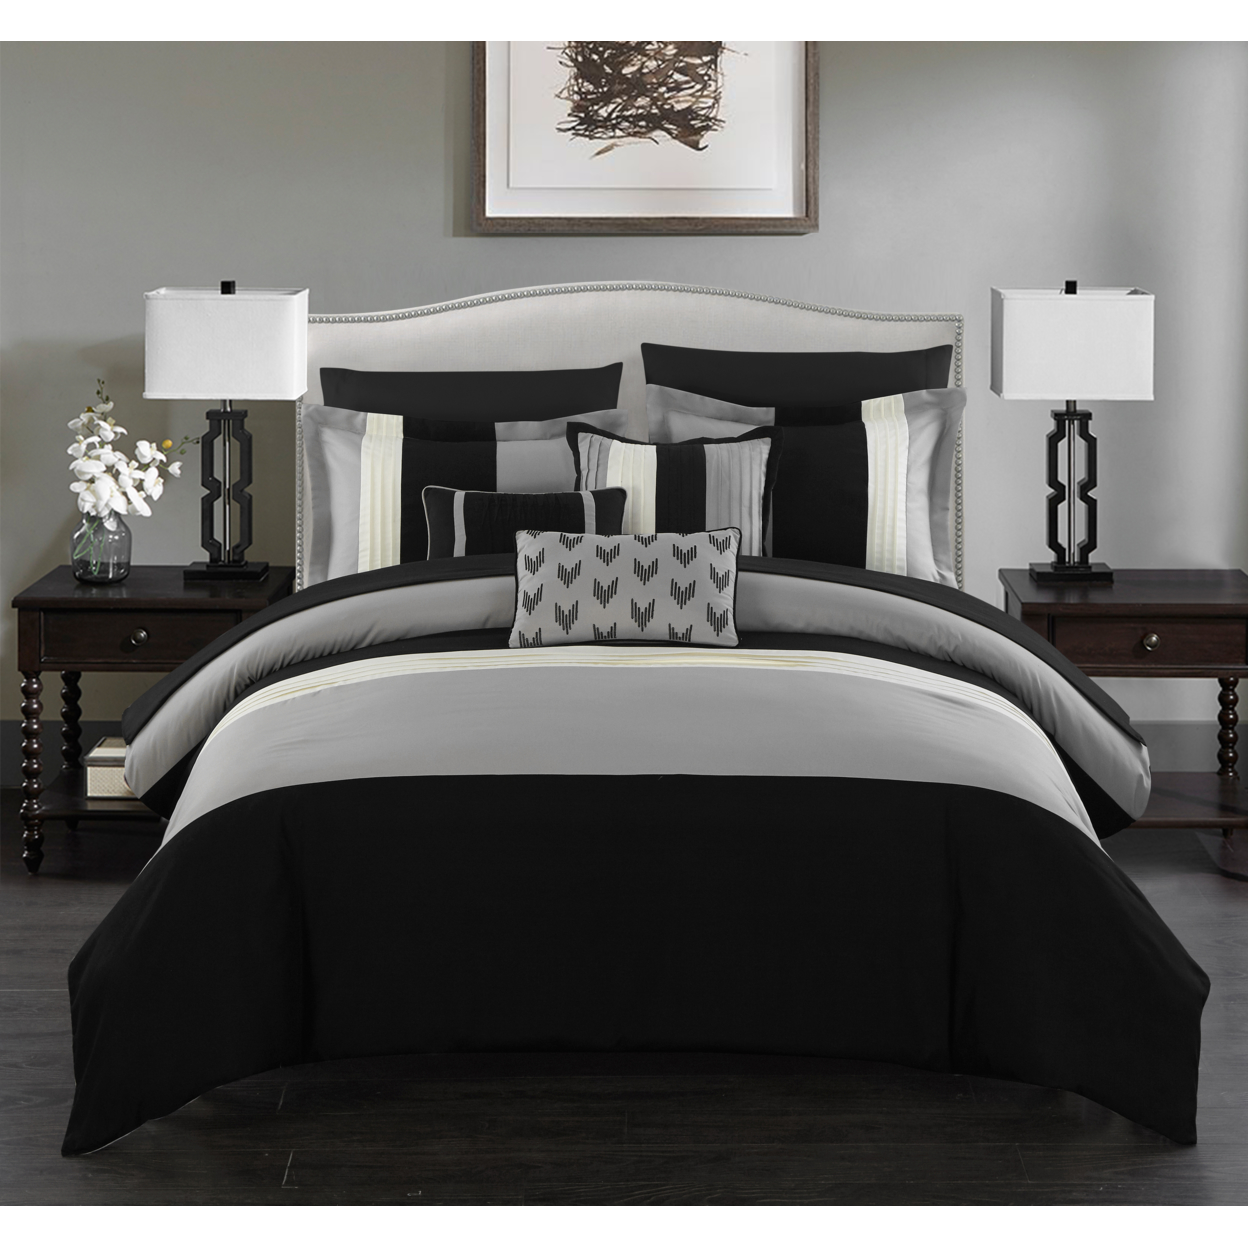 Rashi 10 Or 8 Piece Color Block Bed In A Bag Bedding And Comforter Set - Black, Queen